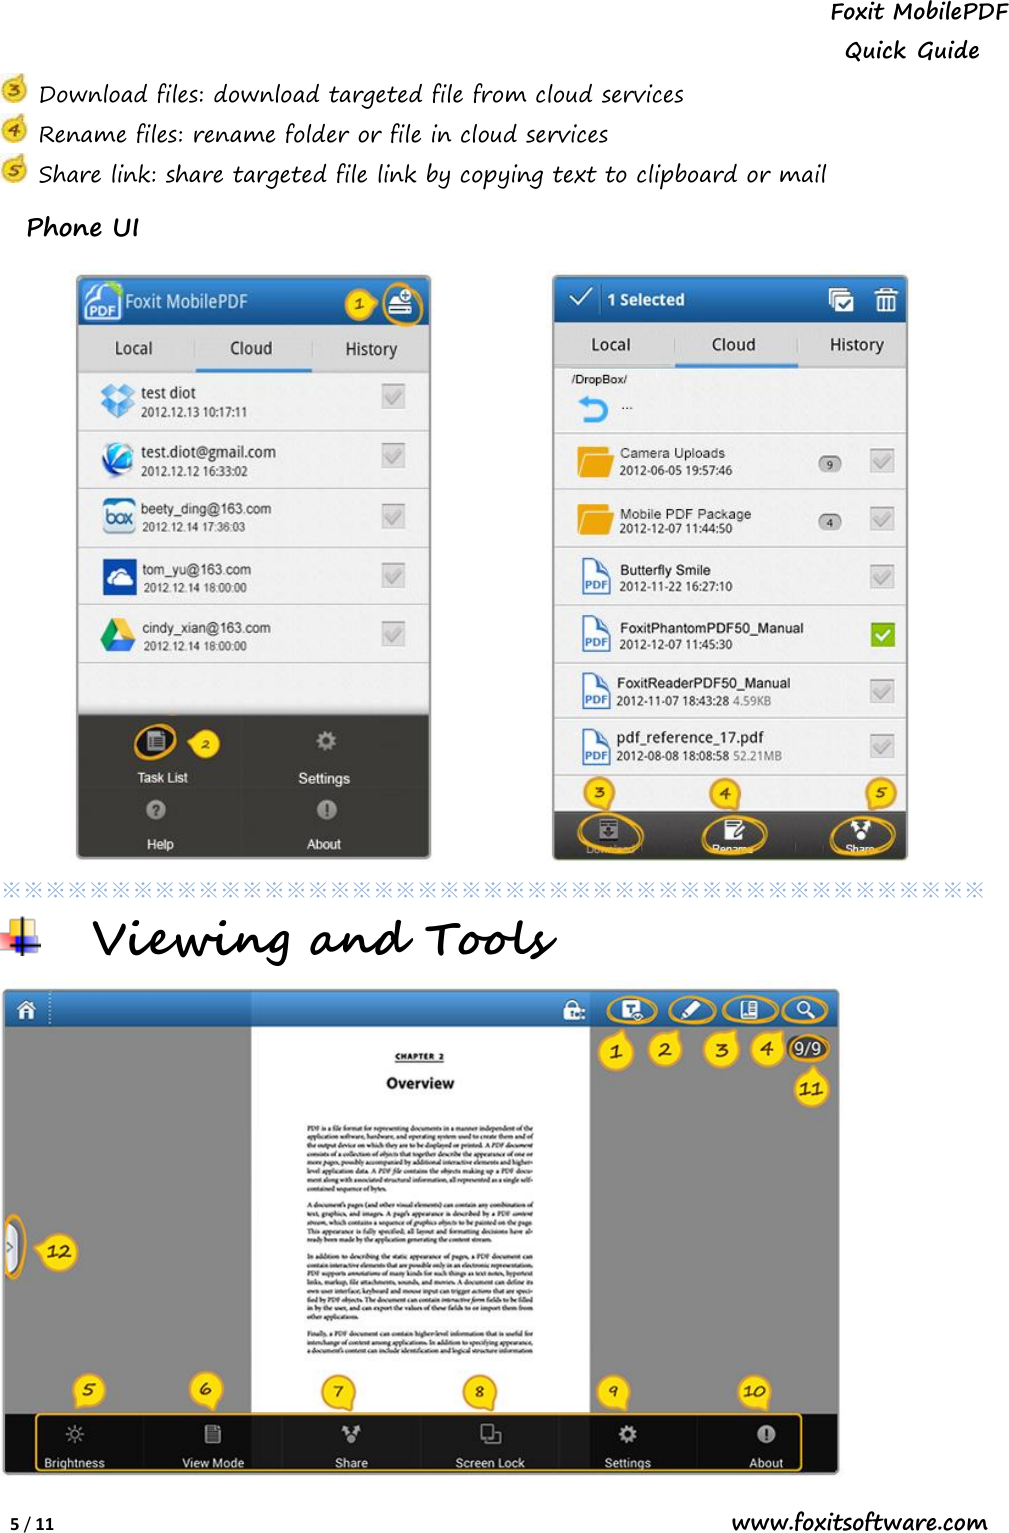 Page 5 of 11 - Foxit  Mobile PDF With RMS For Android - Quick Guide PDFWith RMSfor Um En